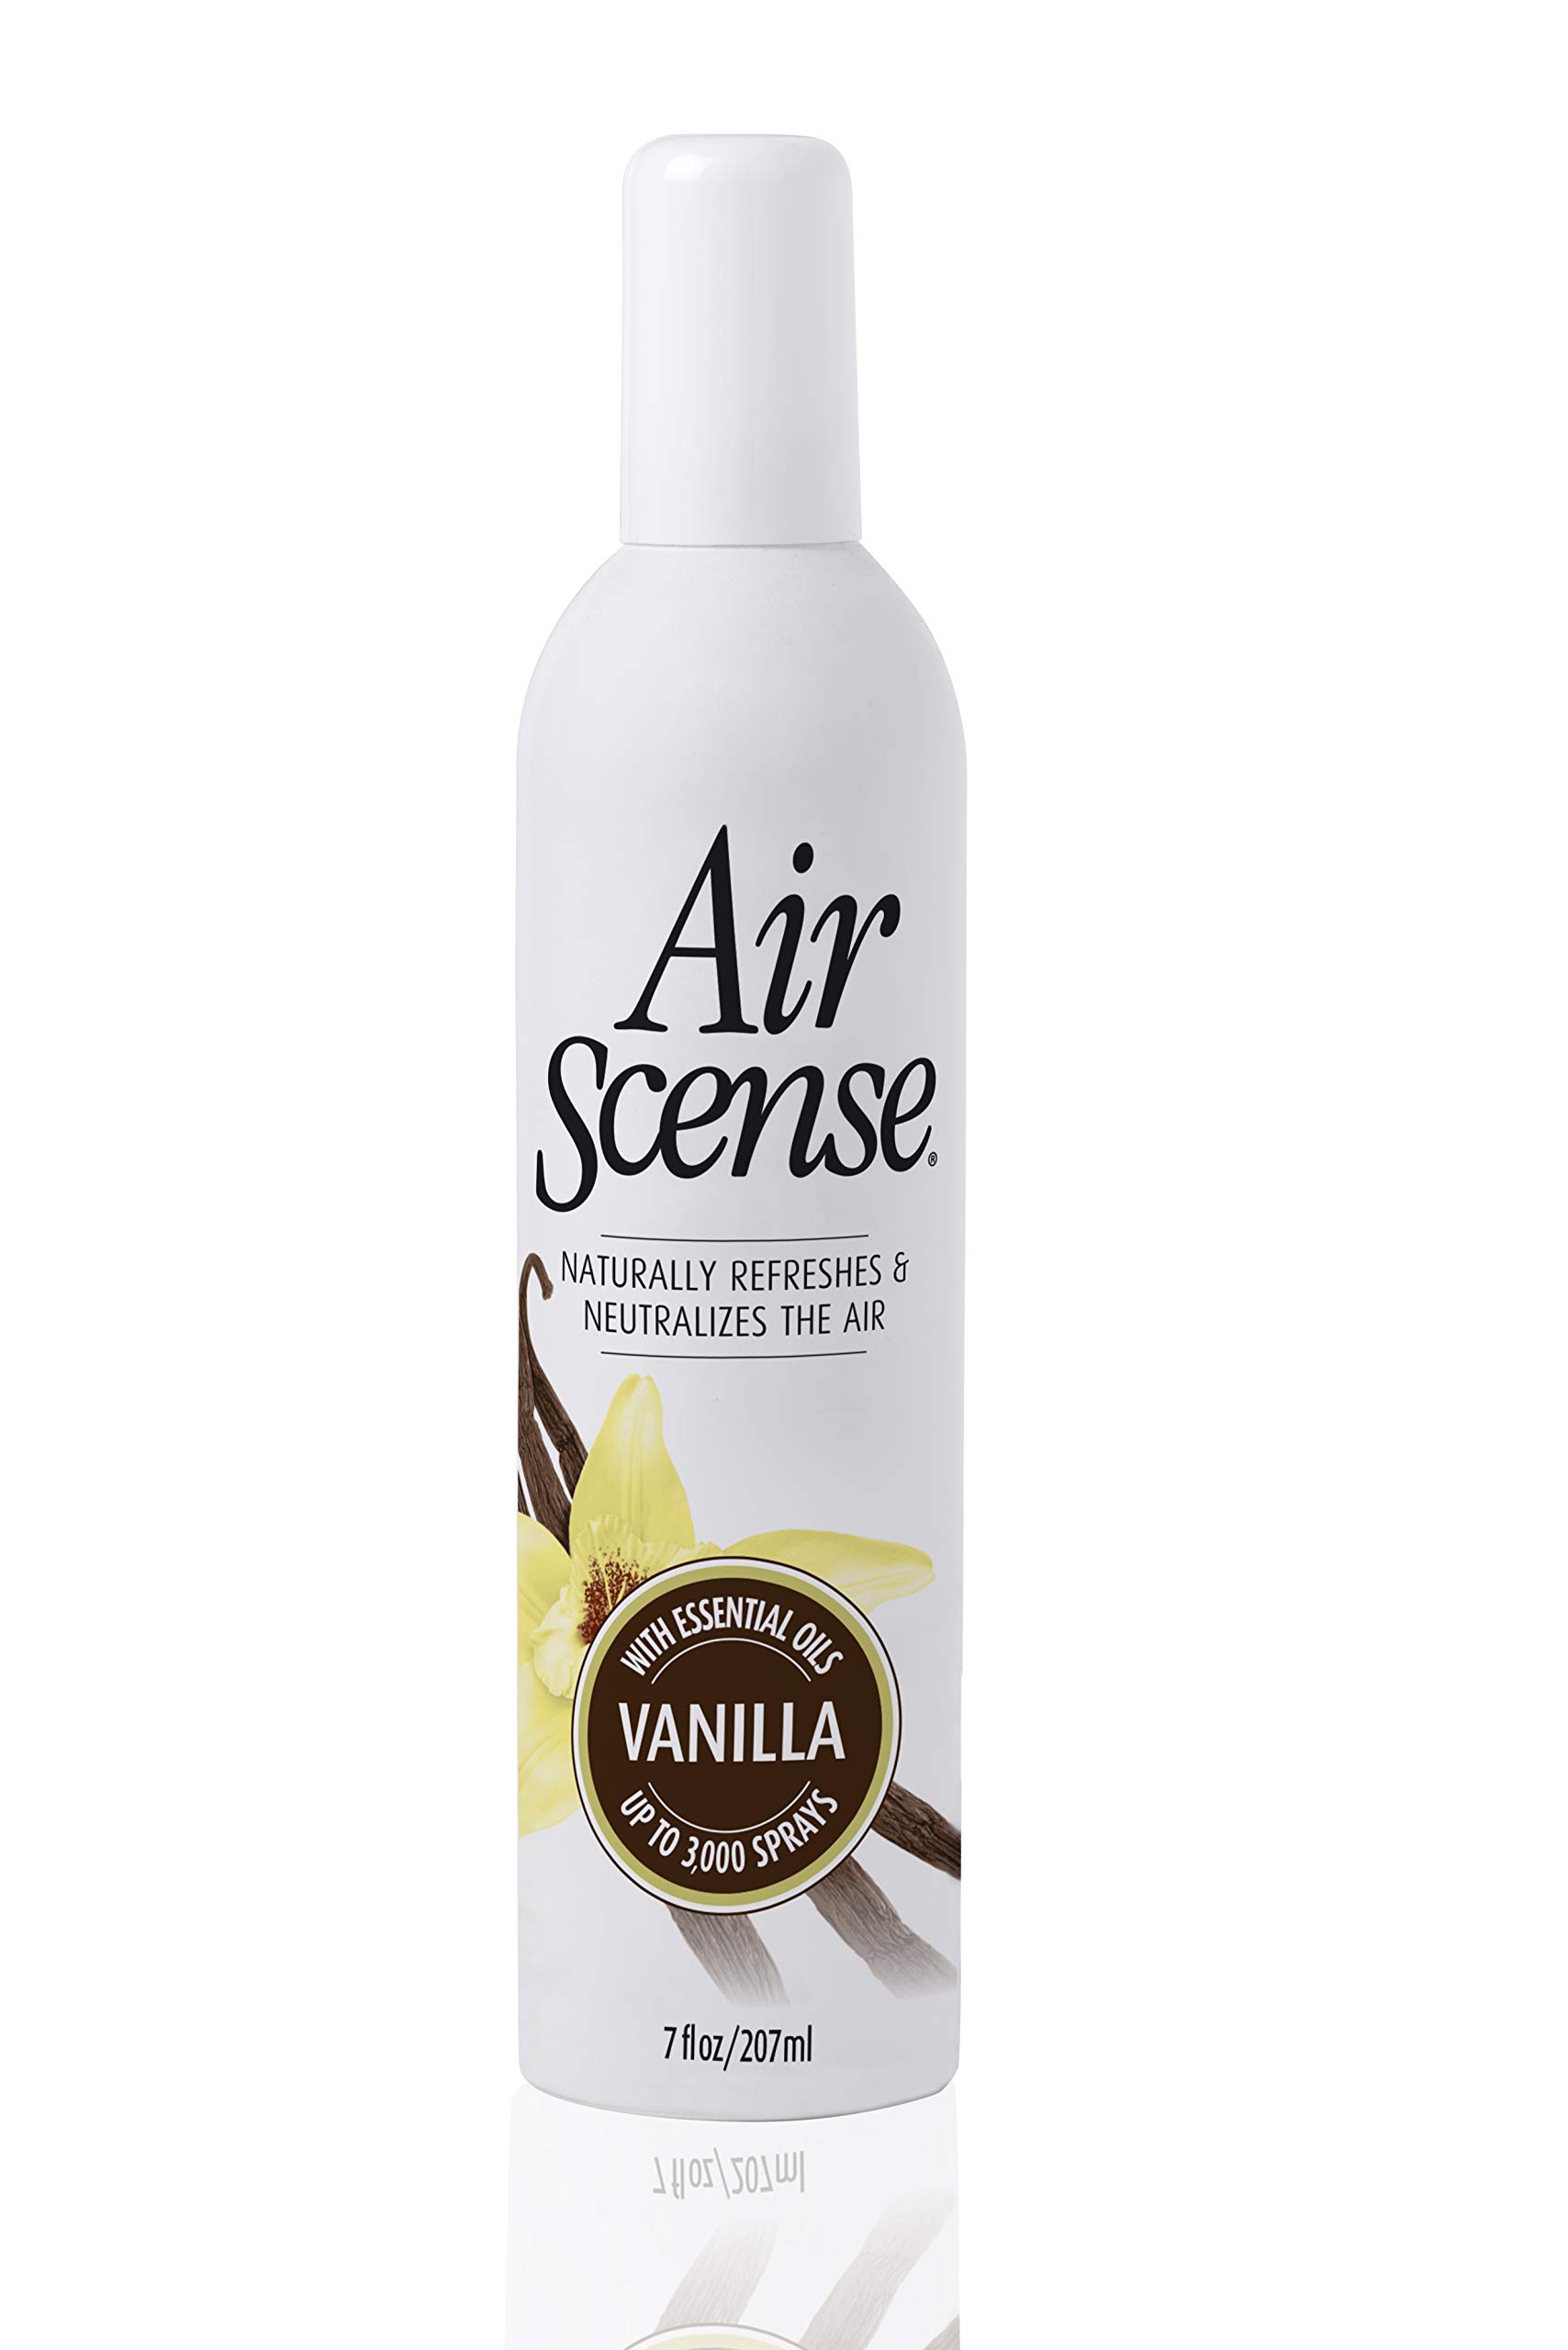 Citra Solv Air Scense Essential Oil Air Freshener - Vanilla Scent -  Non-Aerosol - 7 Ounce Refreshing, Long-Lasting Scent Eco-Friendly  Exceptional